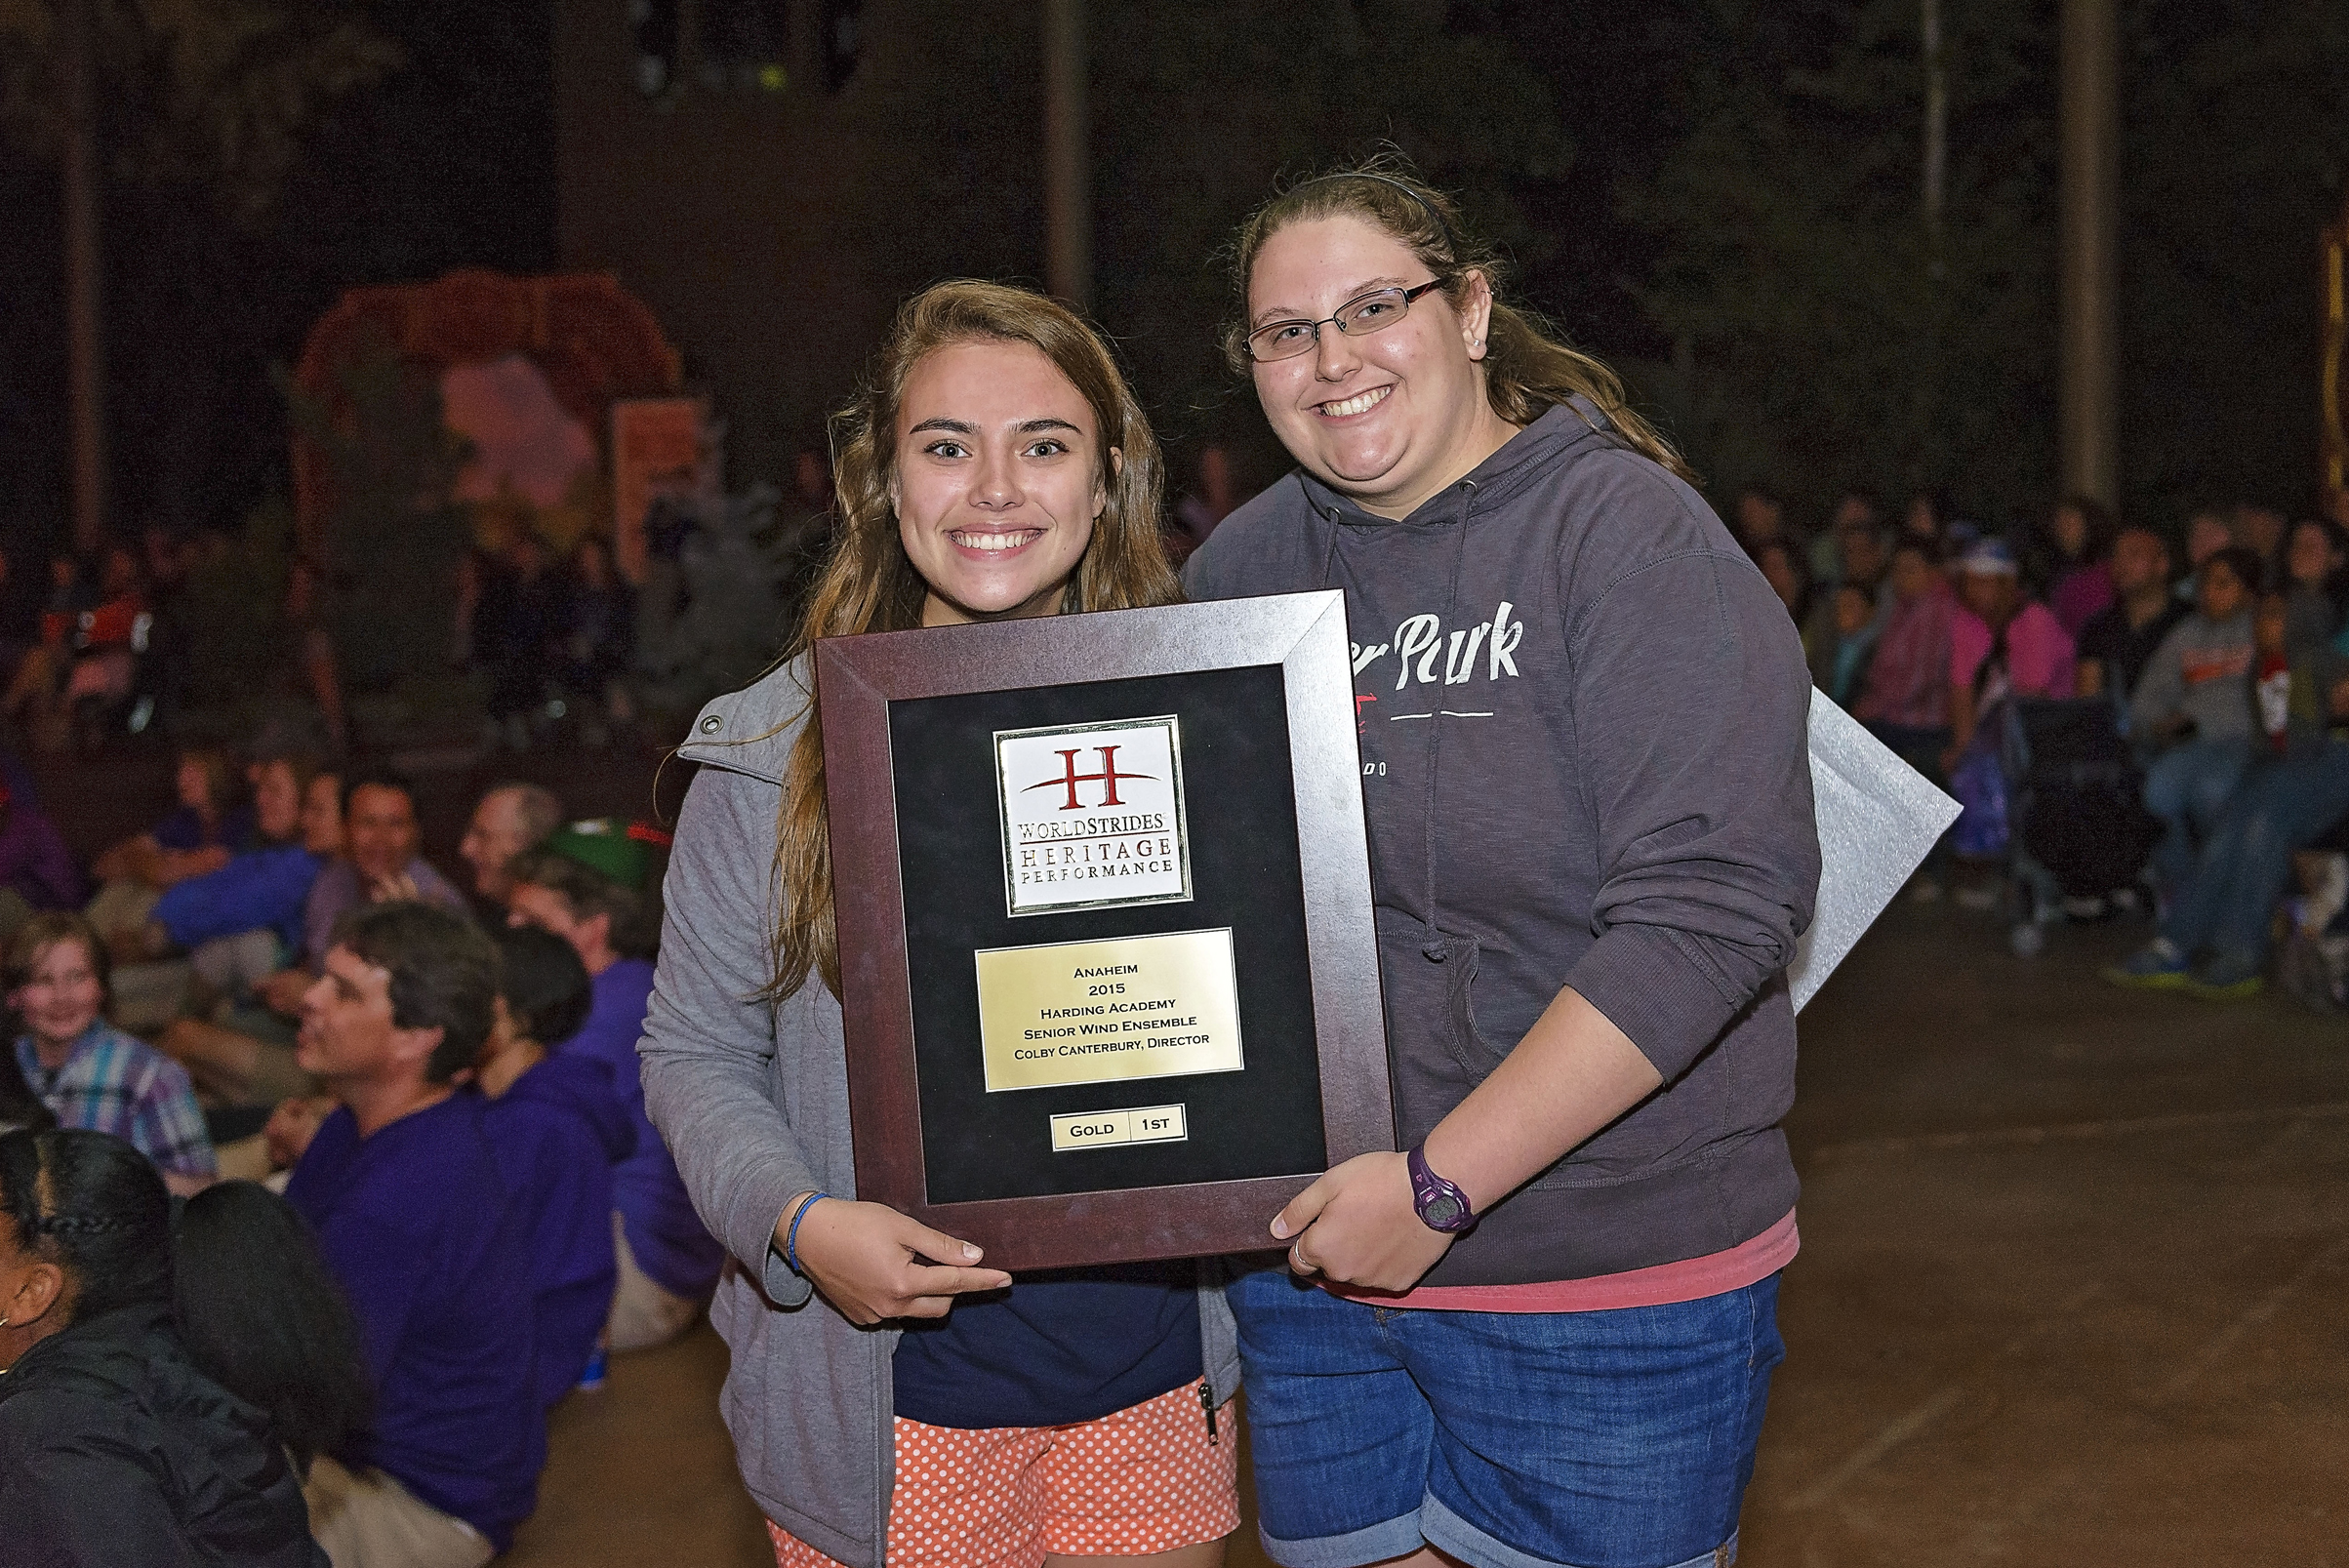 Harding SWE received Gold First Place and Best Overall Band at the Festival.